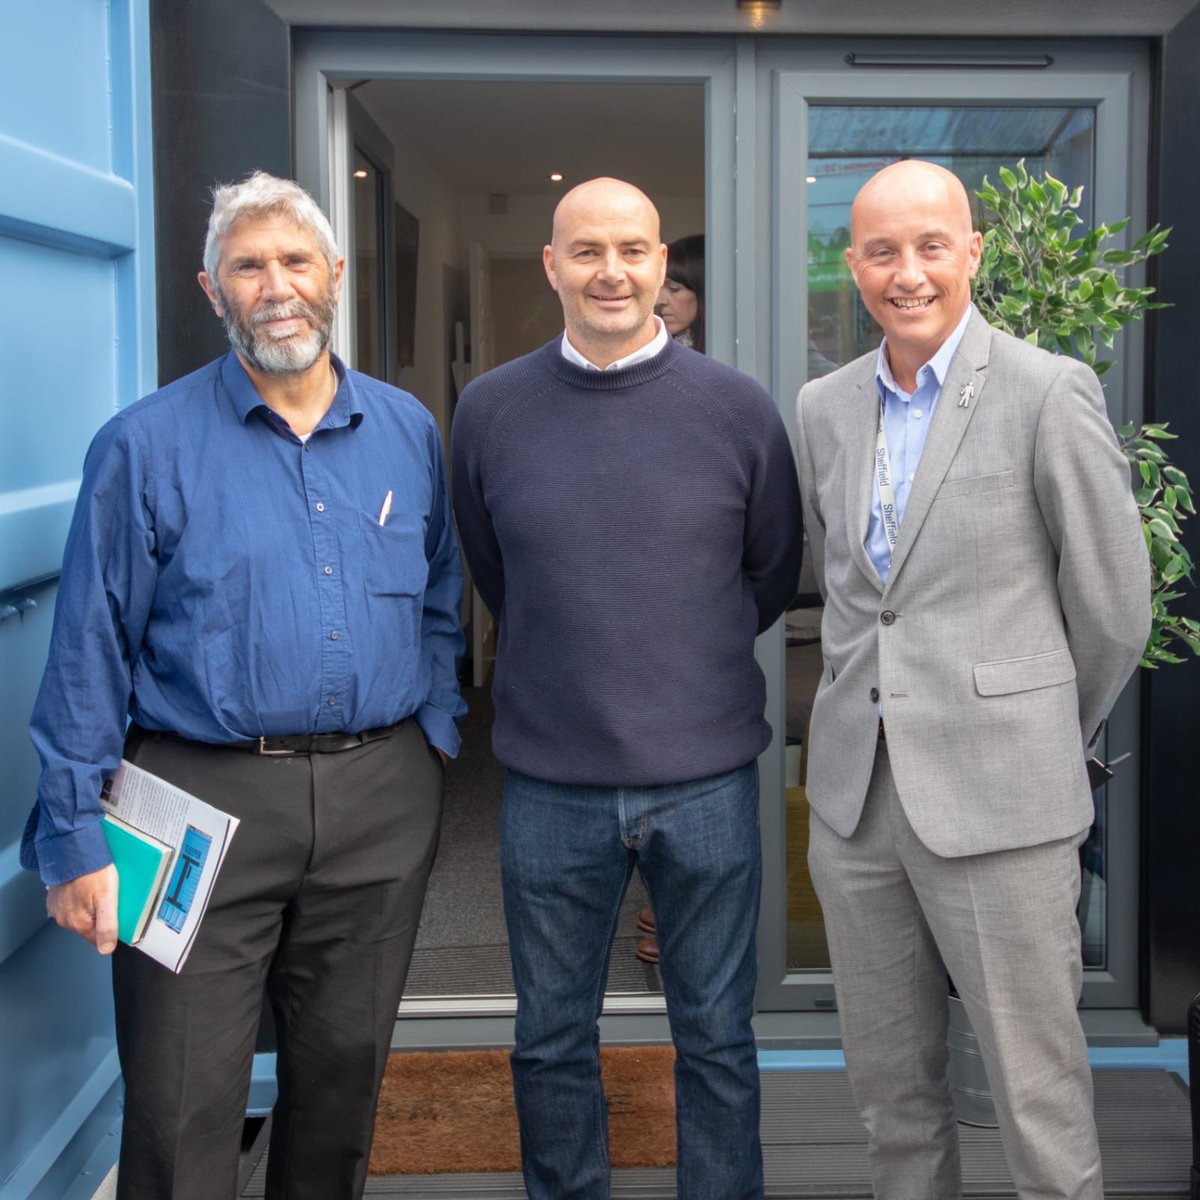 Councillor Jim Steinke and Richard Eyre, Head of City Centre Management, visiting our Sleeper. 

Lets make a difference and stop the cycle of #sleepstreetraverepeat
: 
#homeless #student #accommodation #sheffield #UK @sheffieldstudent @sheffieldcitycouncil  #repost #retweet